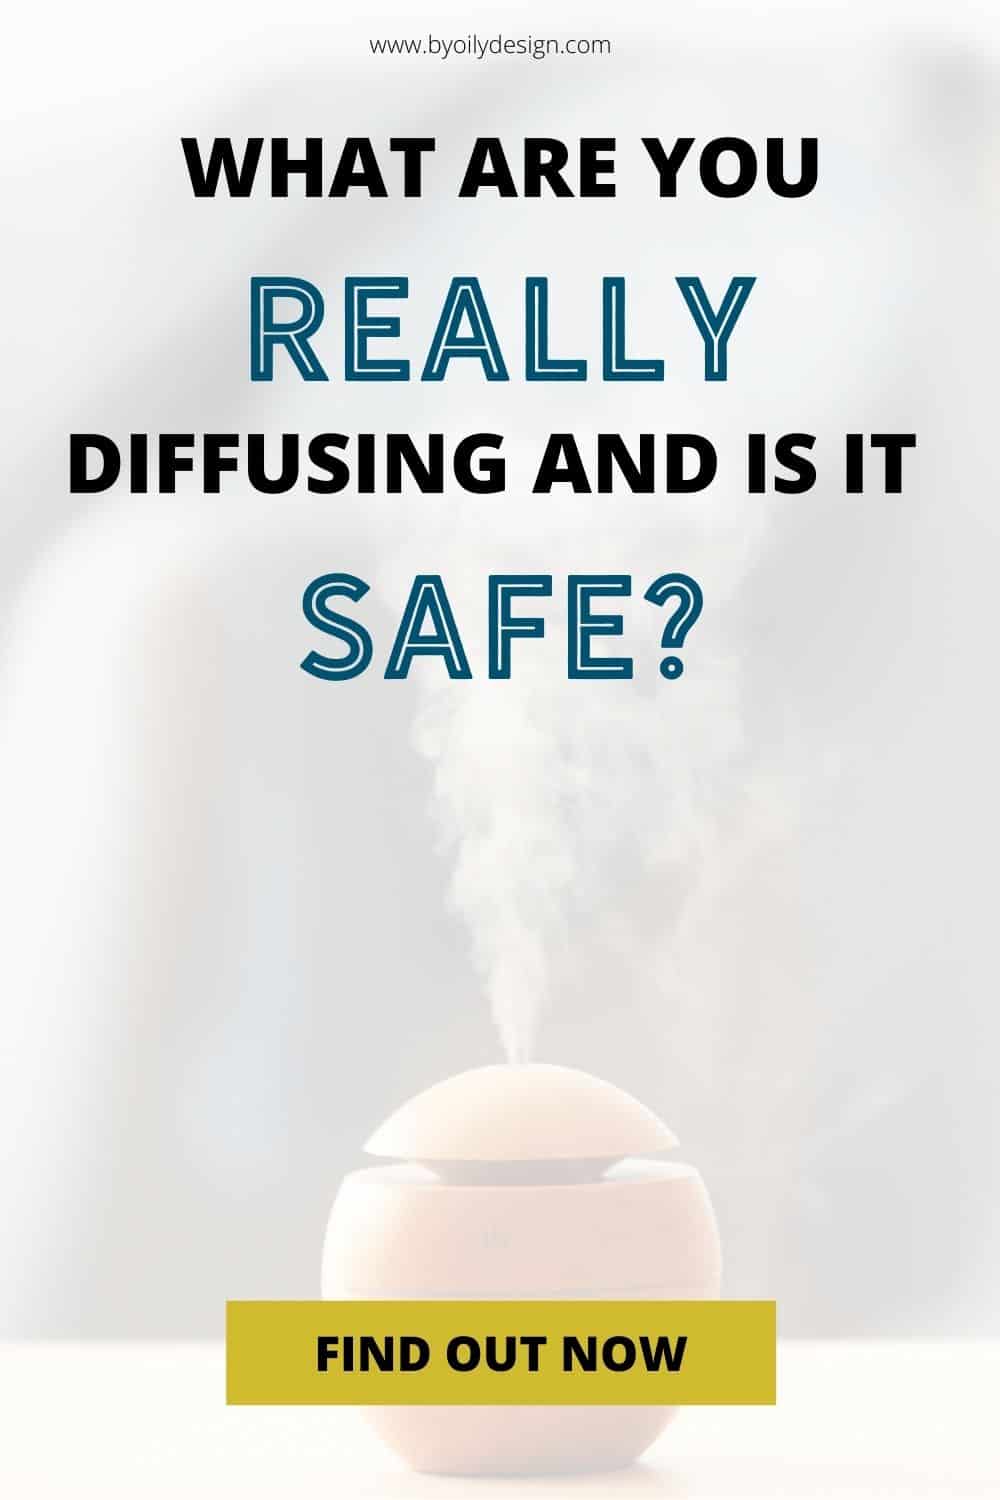 Essential Oil Diffusers and Pet Health- What's the Harm?, Air